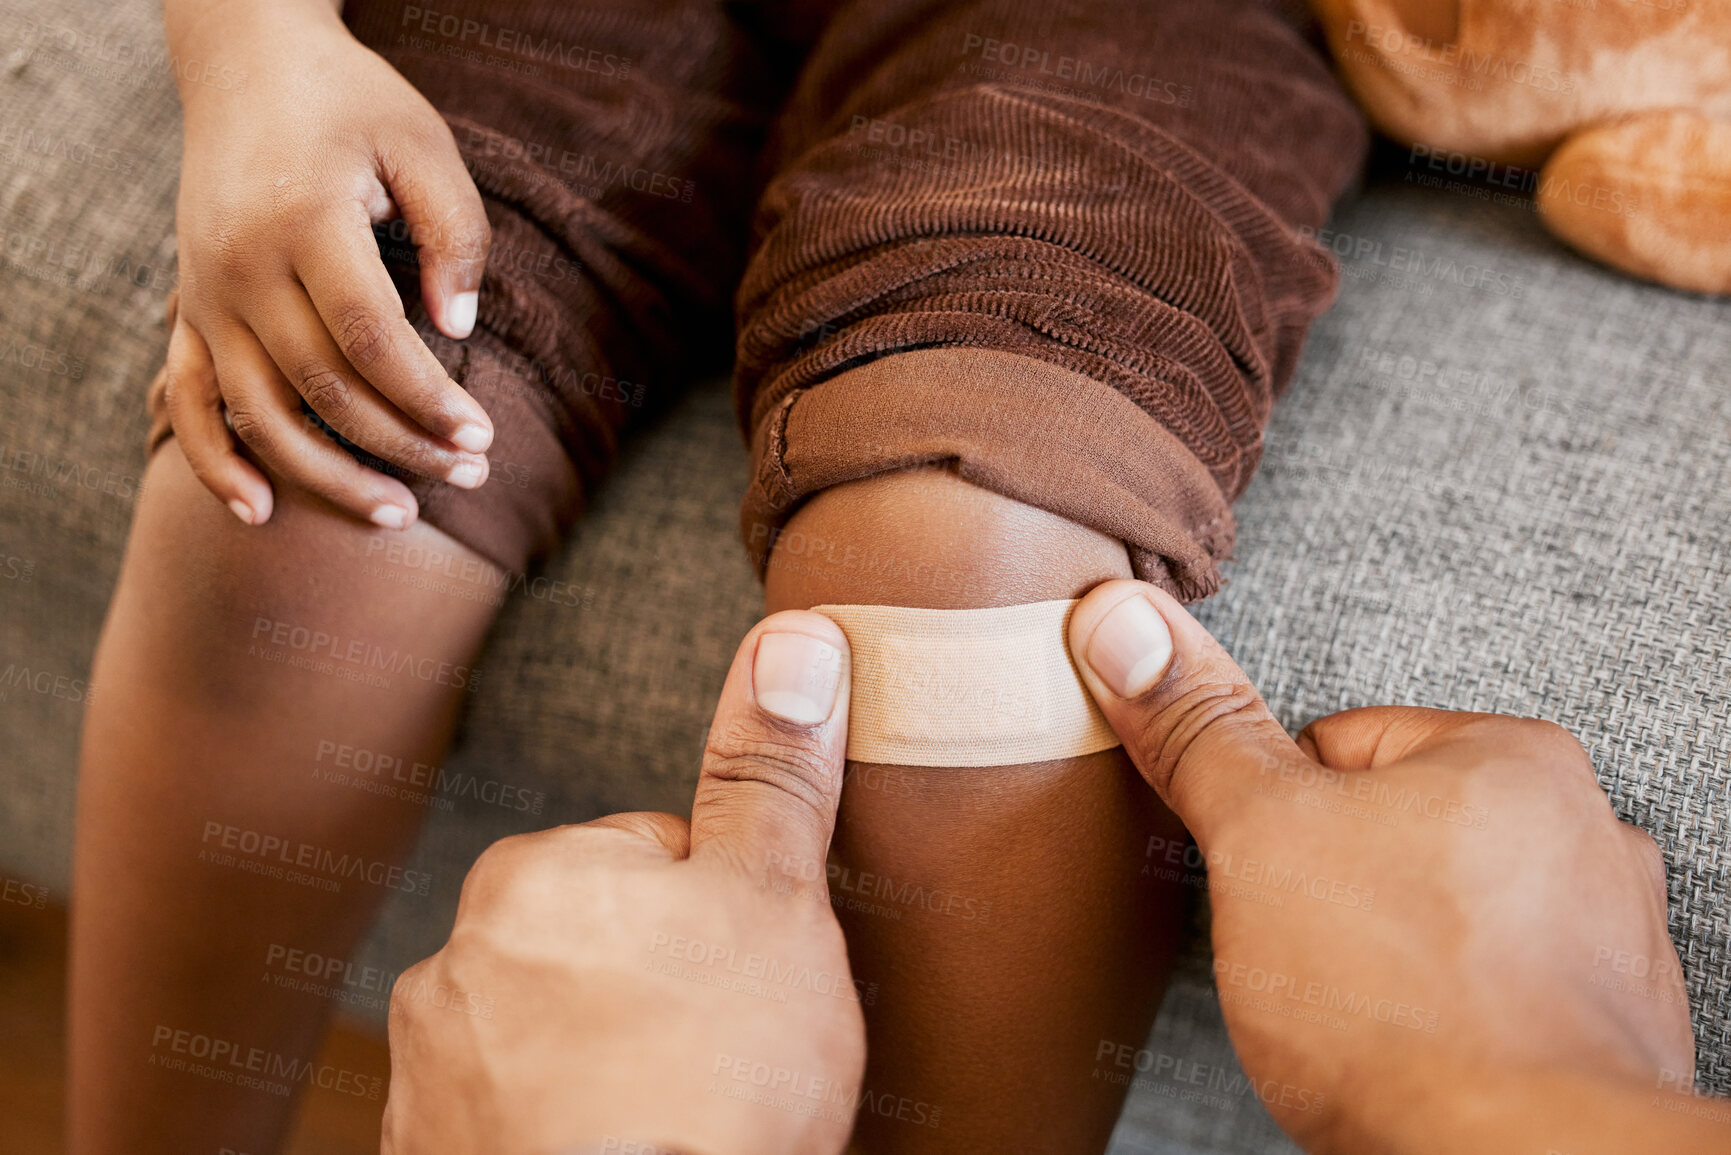 Buy stock photo Parent childcare, knee injury and plaster on child leg after getting hurt showing care, love and support to help growth and childhood development. Hands closeup of adult applying bandage to kid